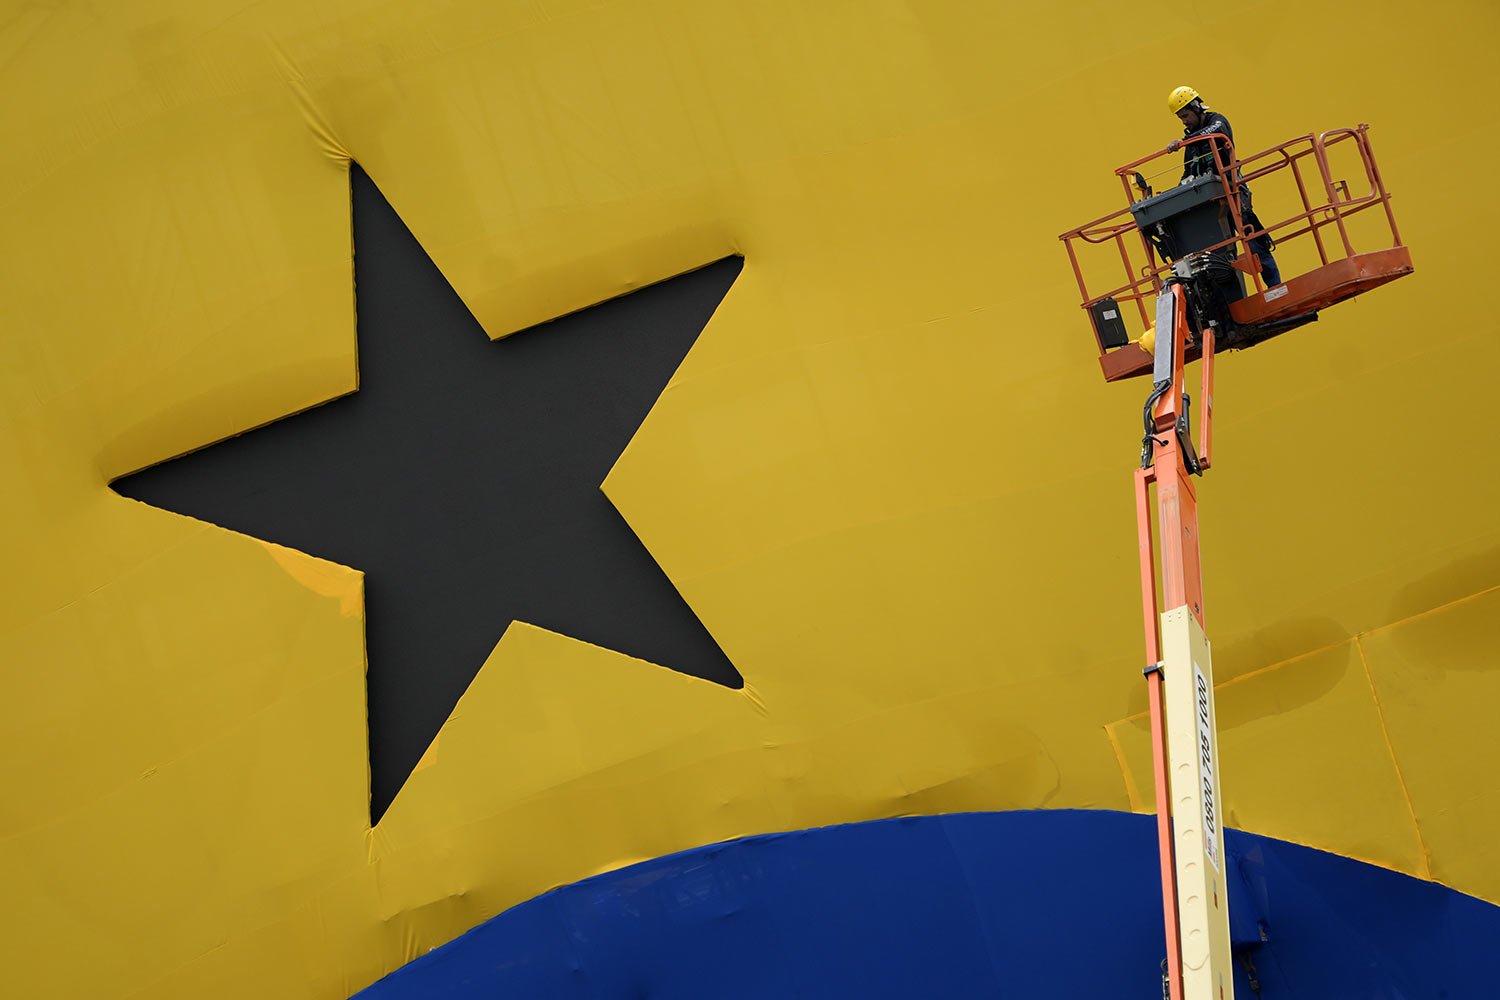  A worker completes the installation of the star that represents the Workers' Party, the party of Brazilian President-elect Luiz Inacio Lula da Silva, during preparations for the inauguration ceremony, in Brasilia, Brazil, Saturday, Dec. 31, 2022. (A